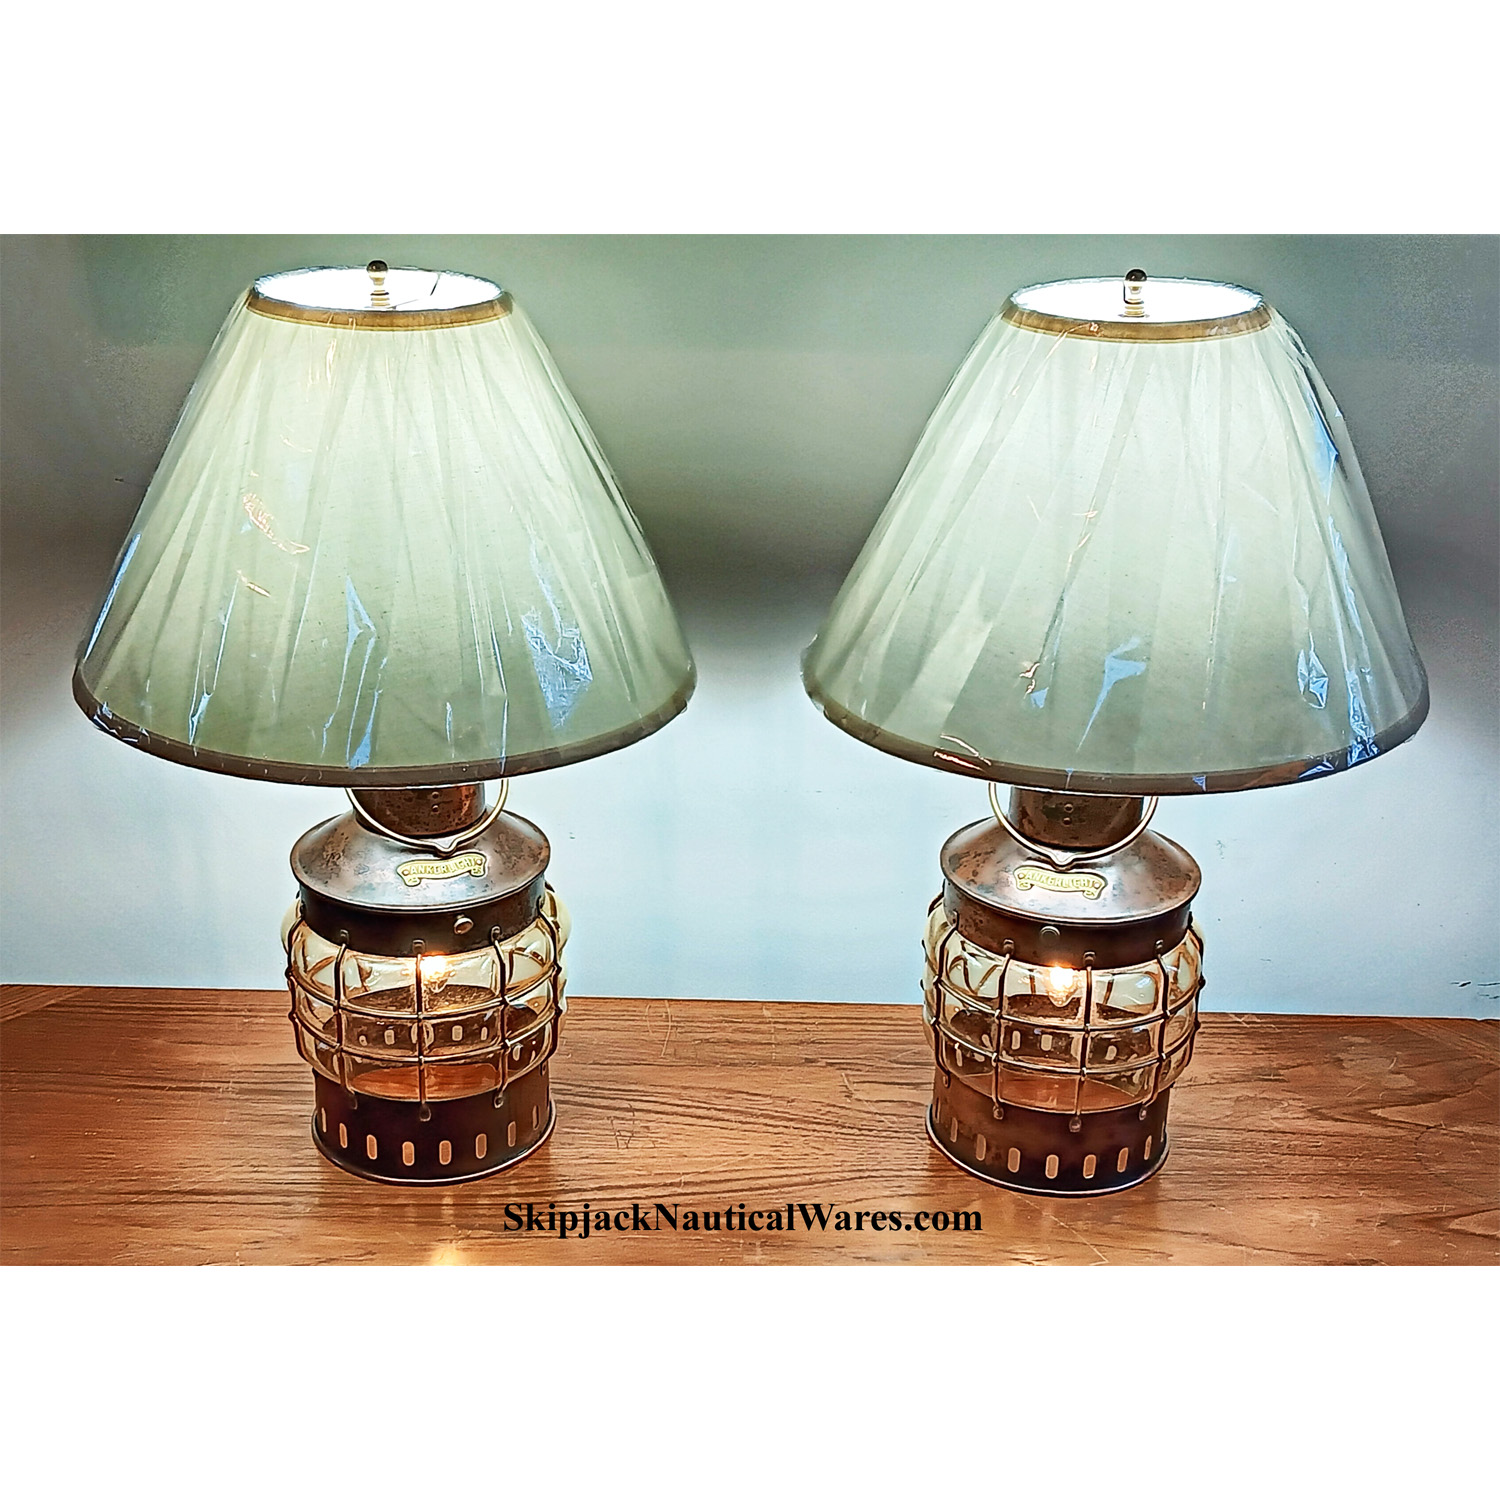 Exceptional Nautical Dutch Made Ankerlicht Table Lamp